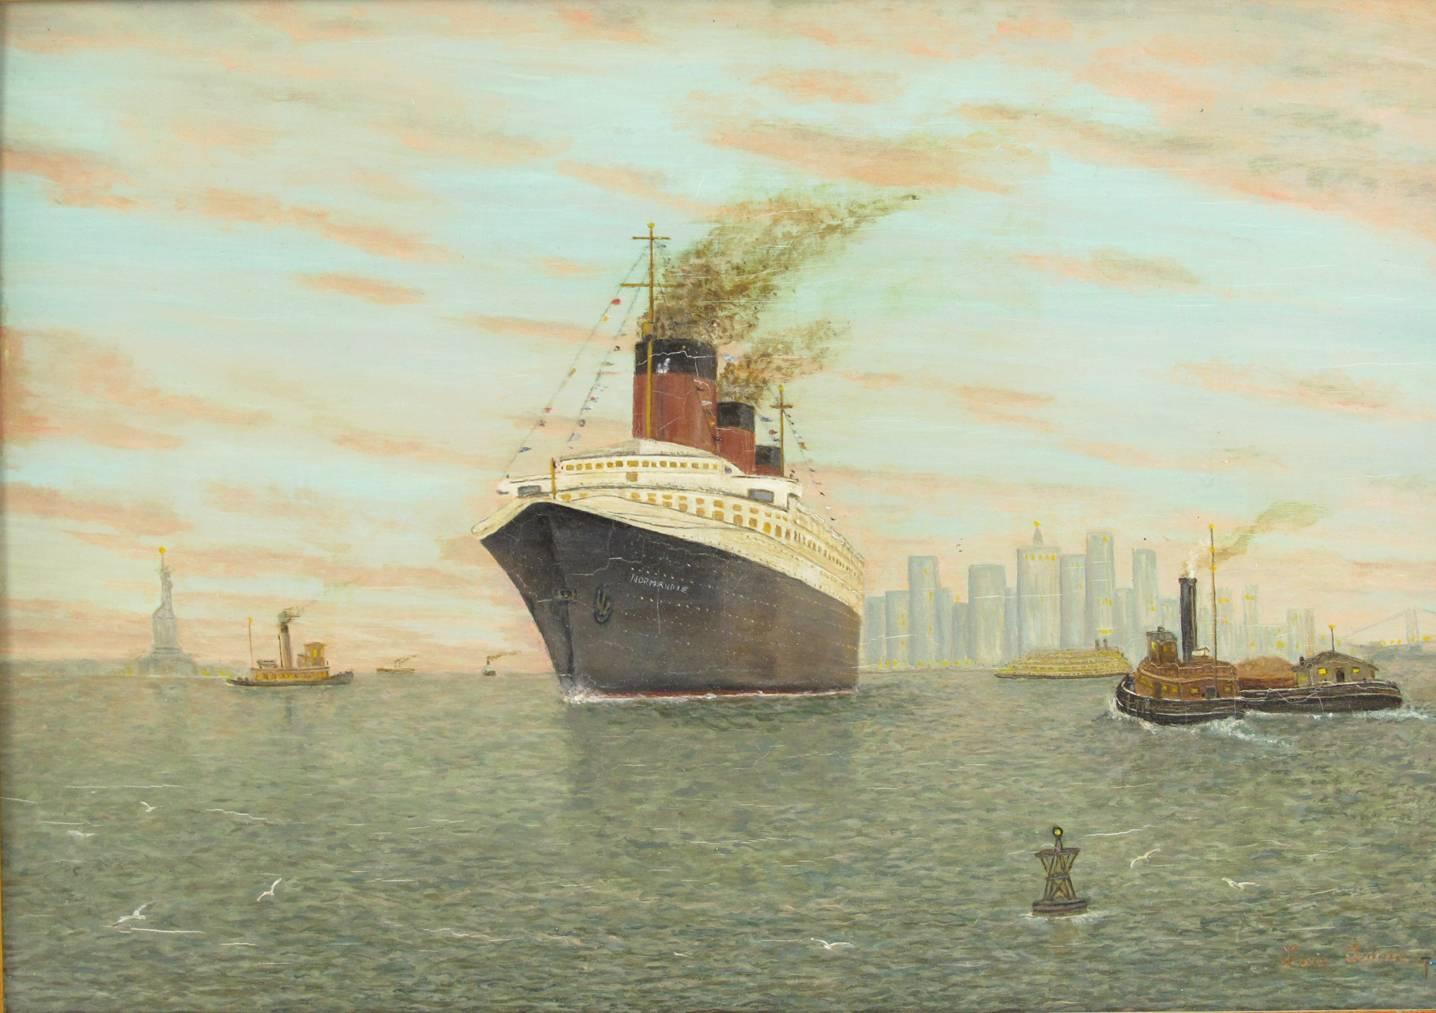 Rare original oil on mahogany wood panel by Louis Sedroc, France. Featuring the SS Normandie Transatlantic Ocean Liner arriving in New York. Vintage original wood frame. Signed on bottom right corner. Hand-written marking at the back on frame: 